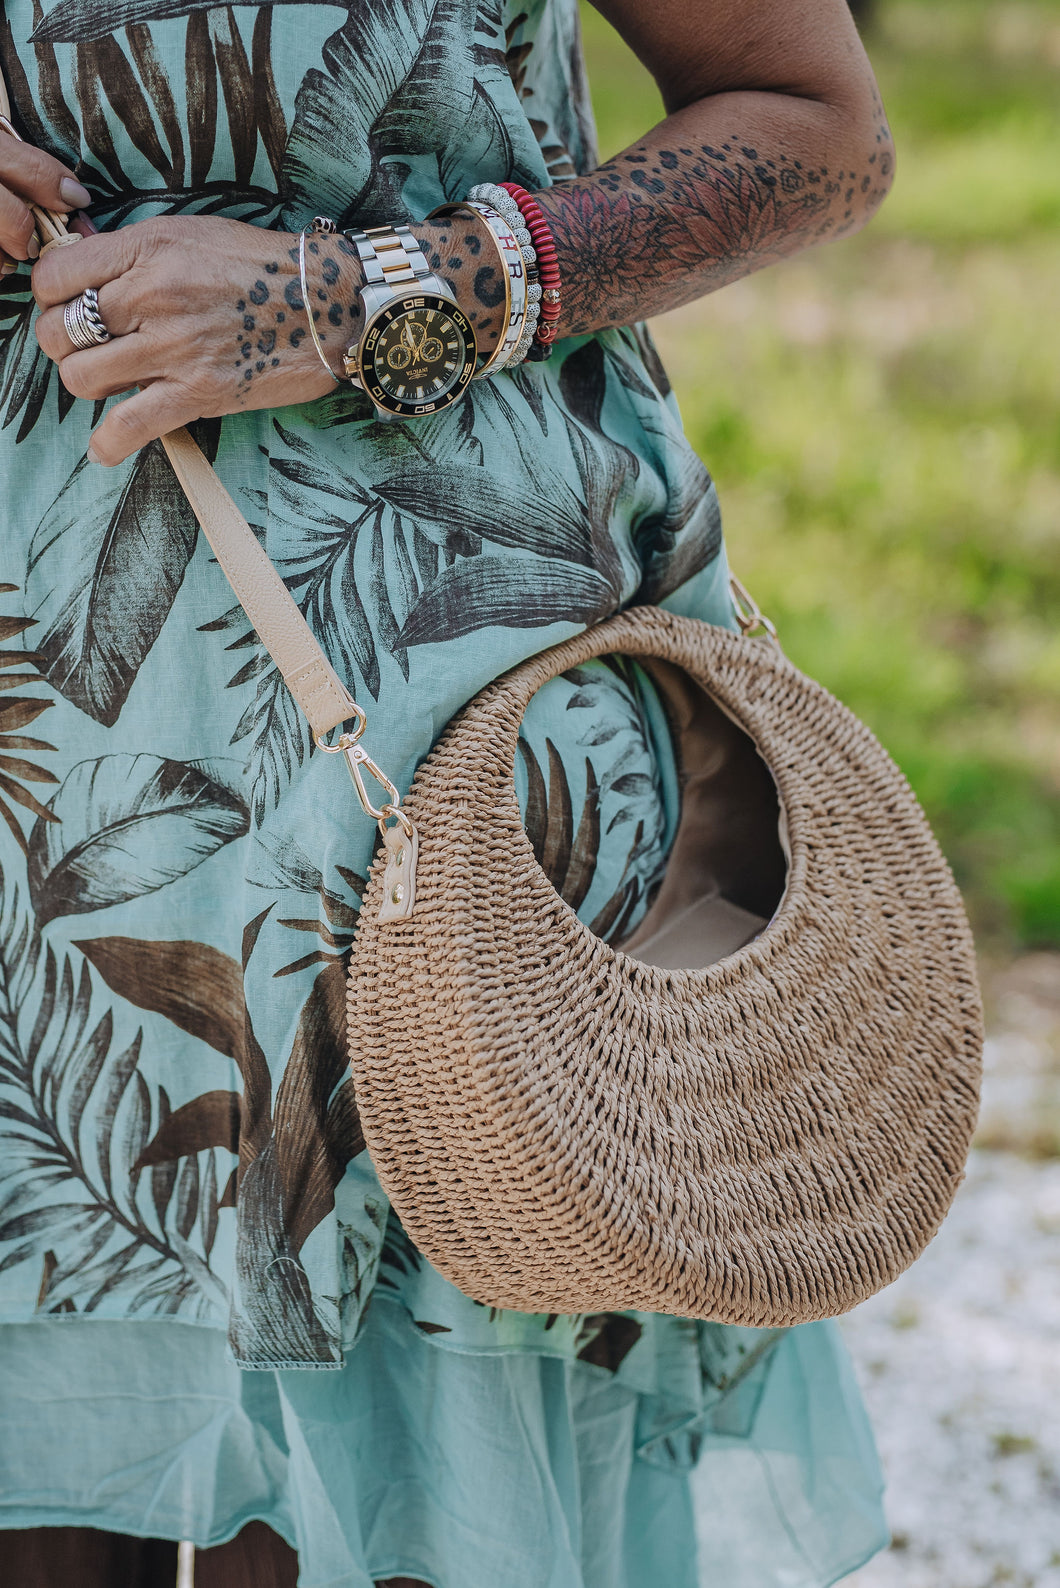 Rounded Summer Straw Bag